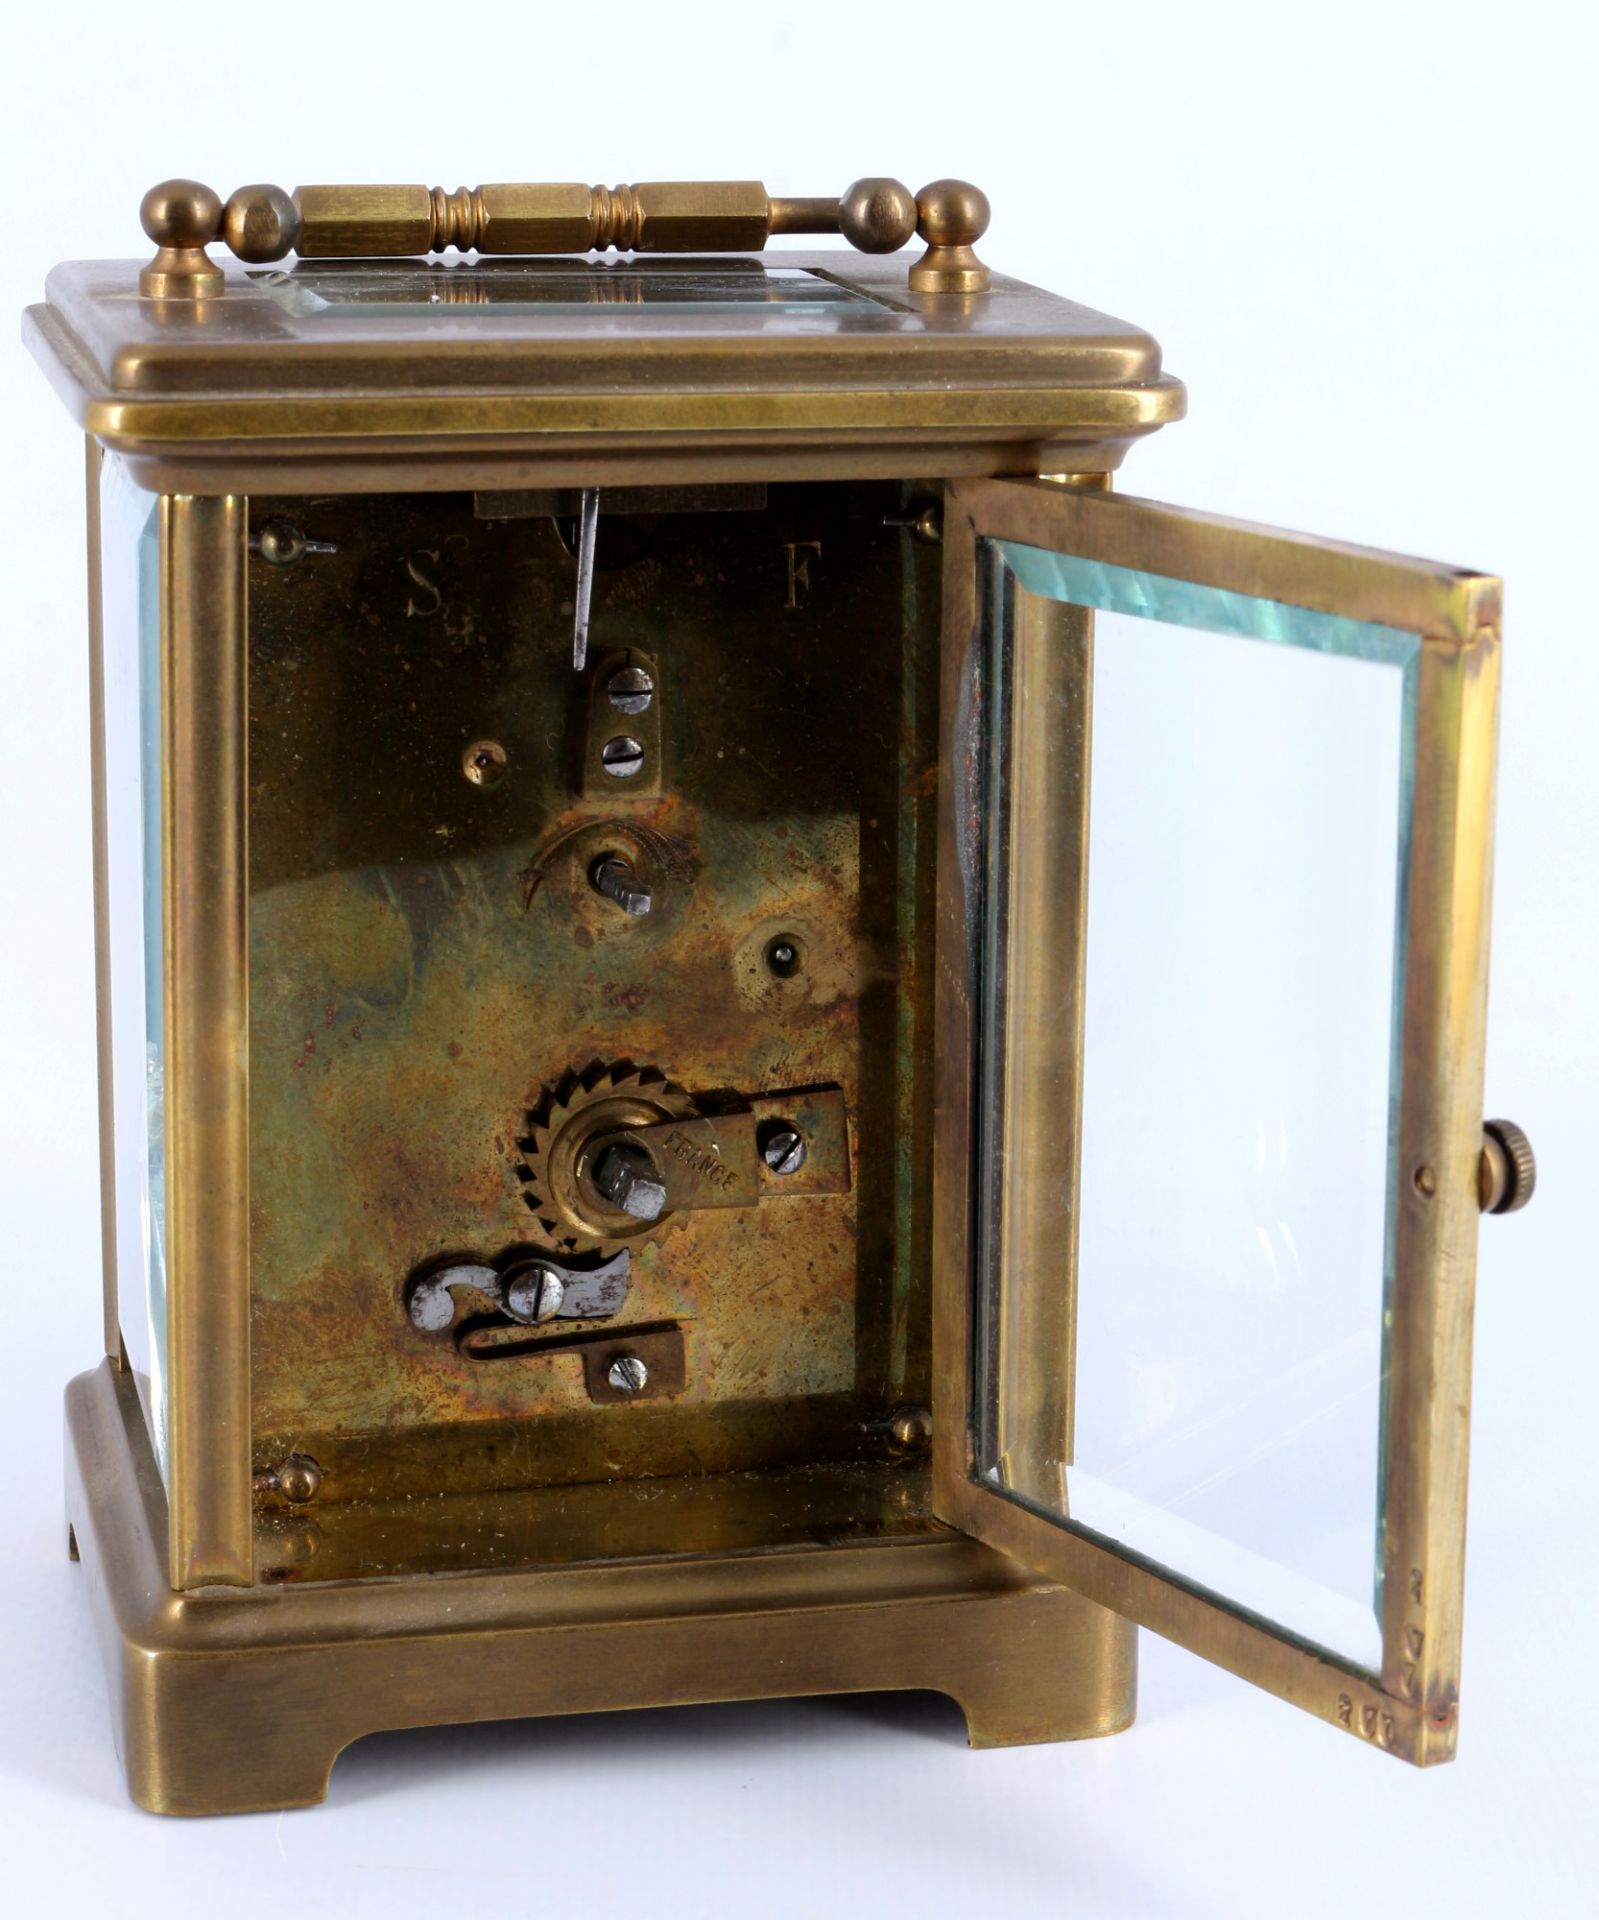 Large Carriage clock, France around 1900, - Image 5 of 6